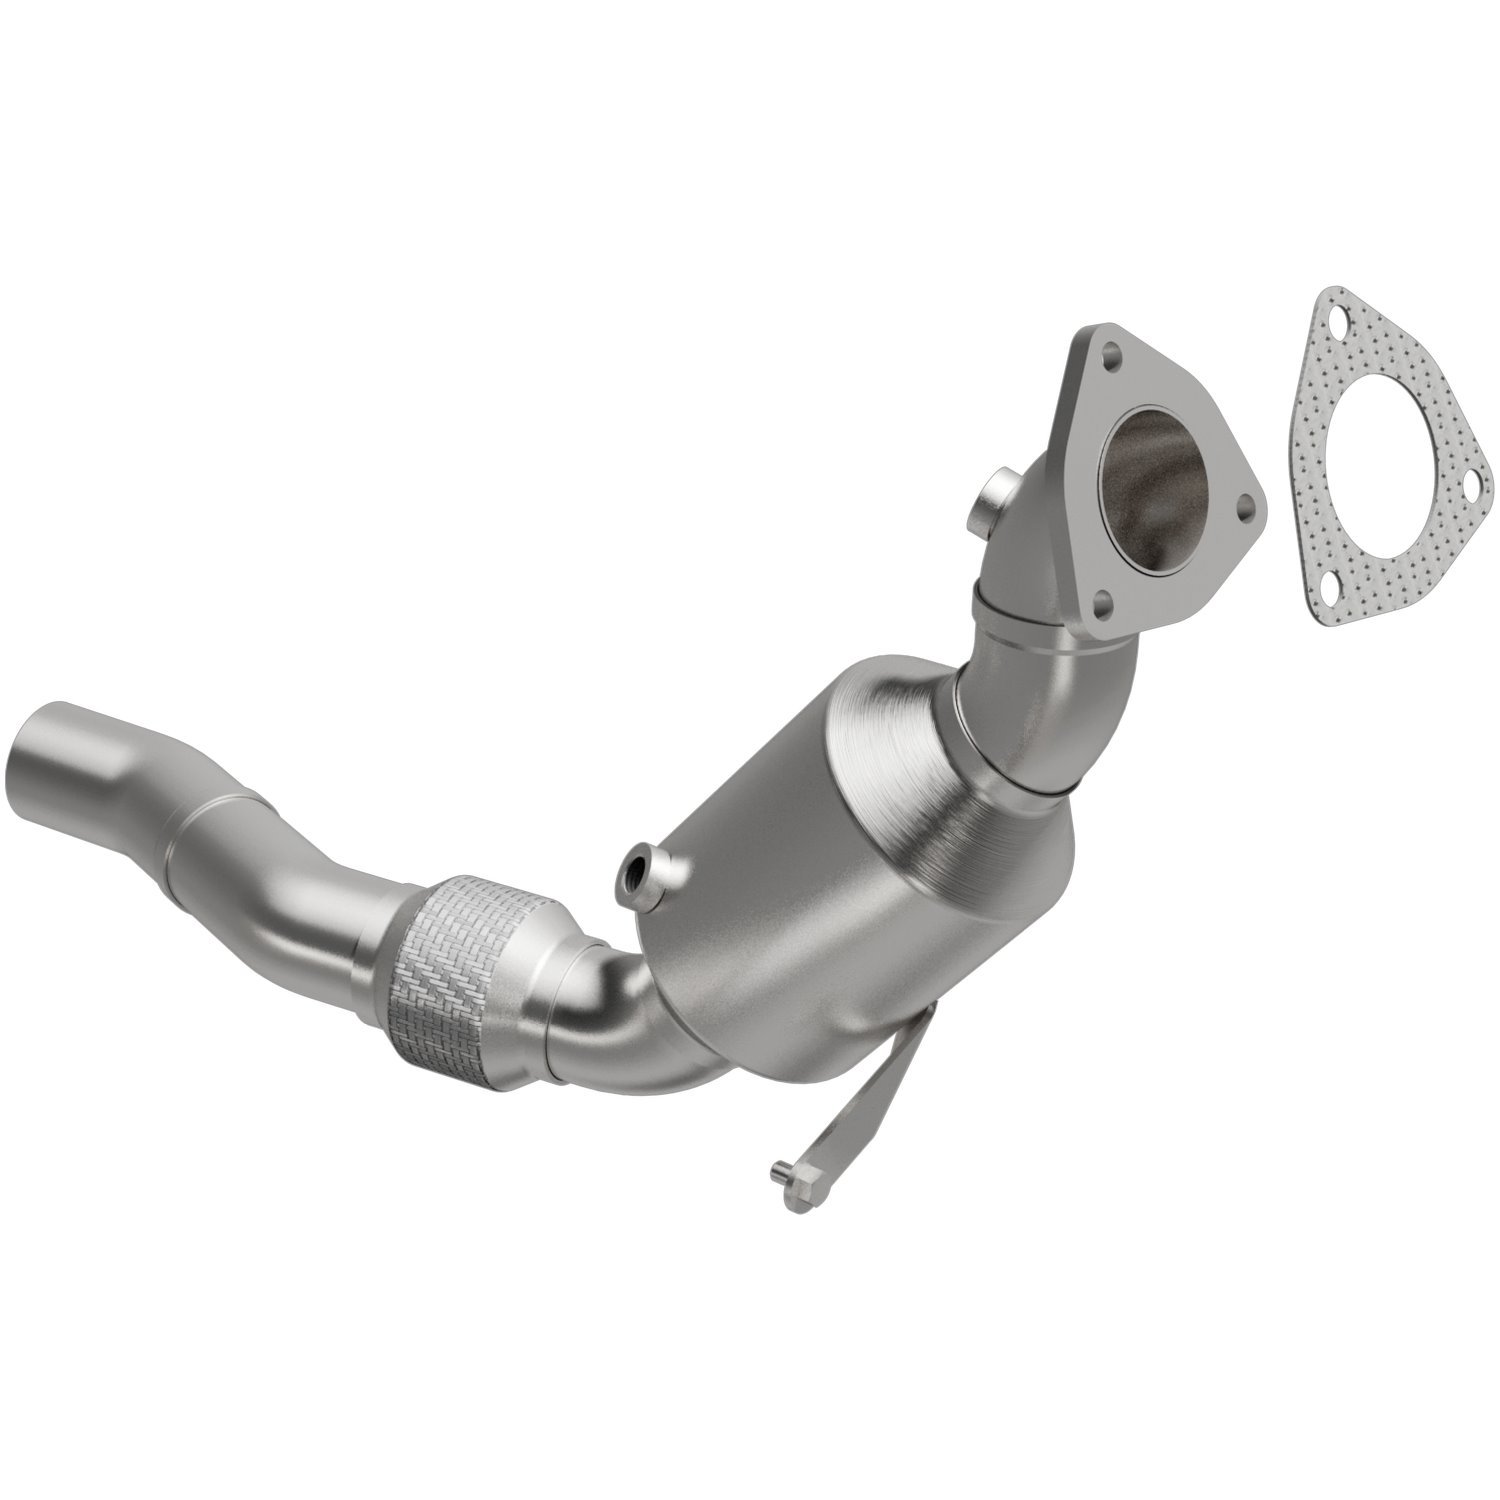 2016-2019 Cadillac CT6 OEM Grade Federal / EPA Compliant Direct-Fit Catalytic Converter